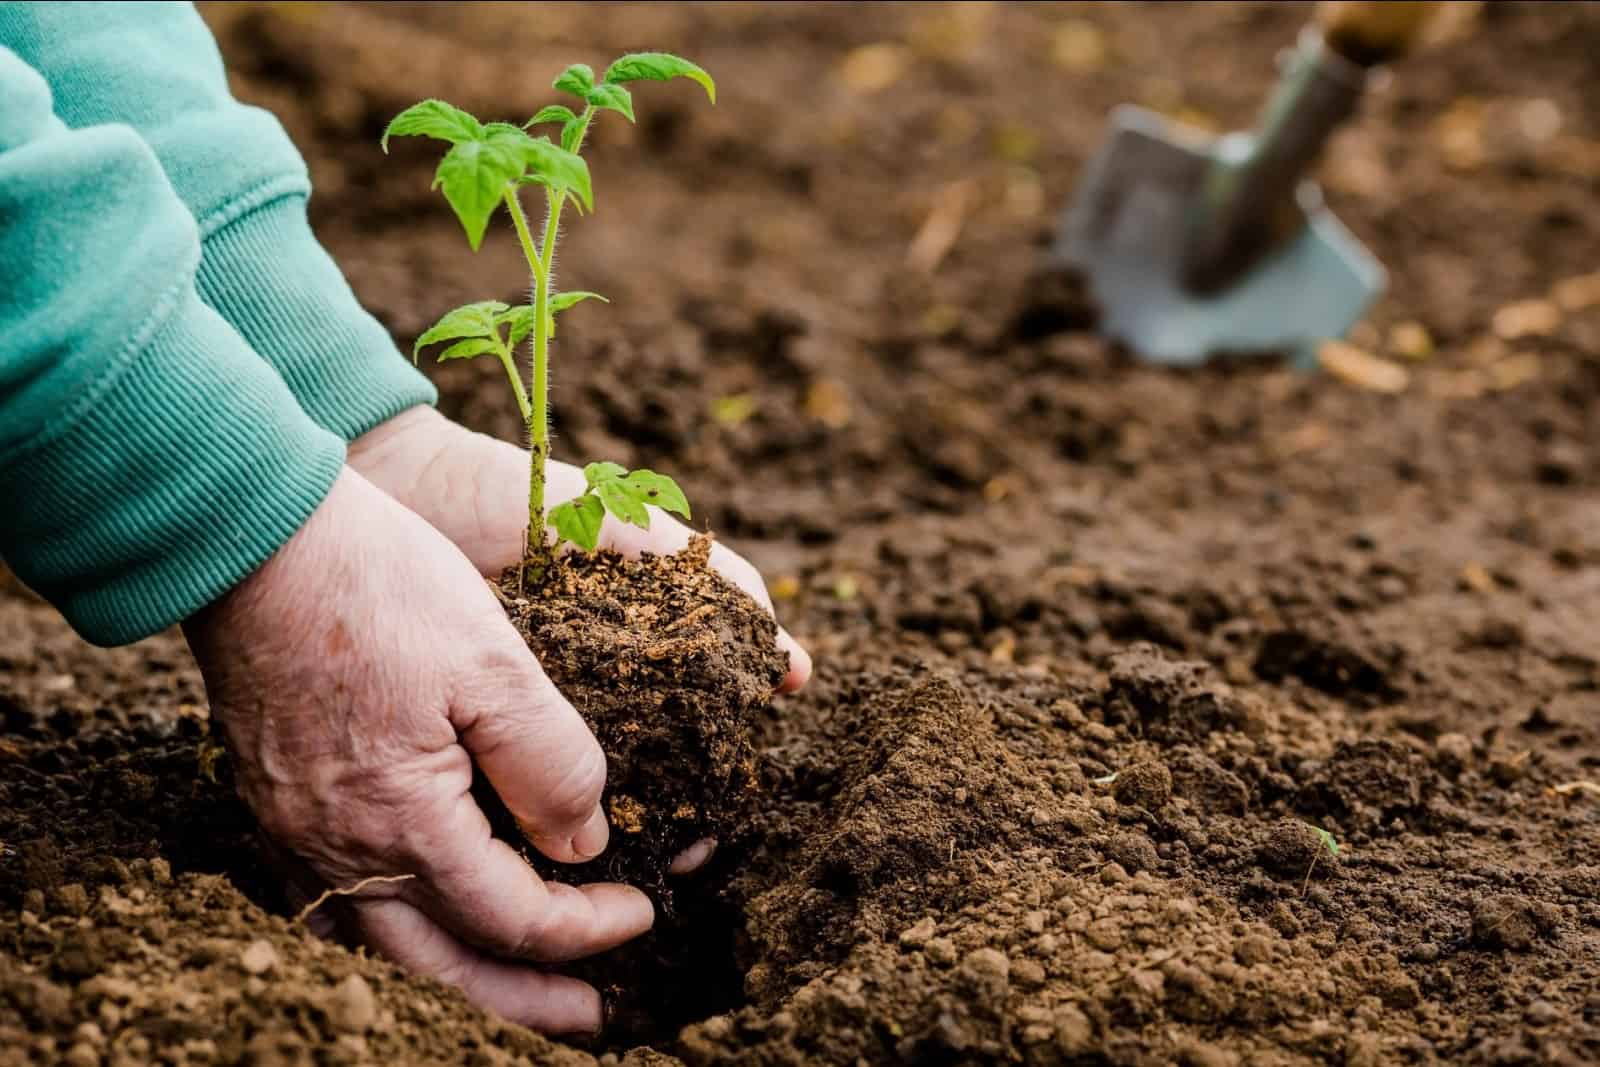 Hands of an elderly woman holding the soil with a young plant.